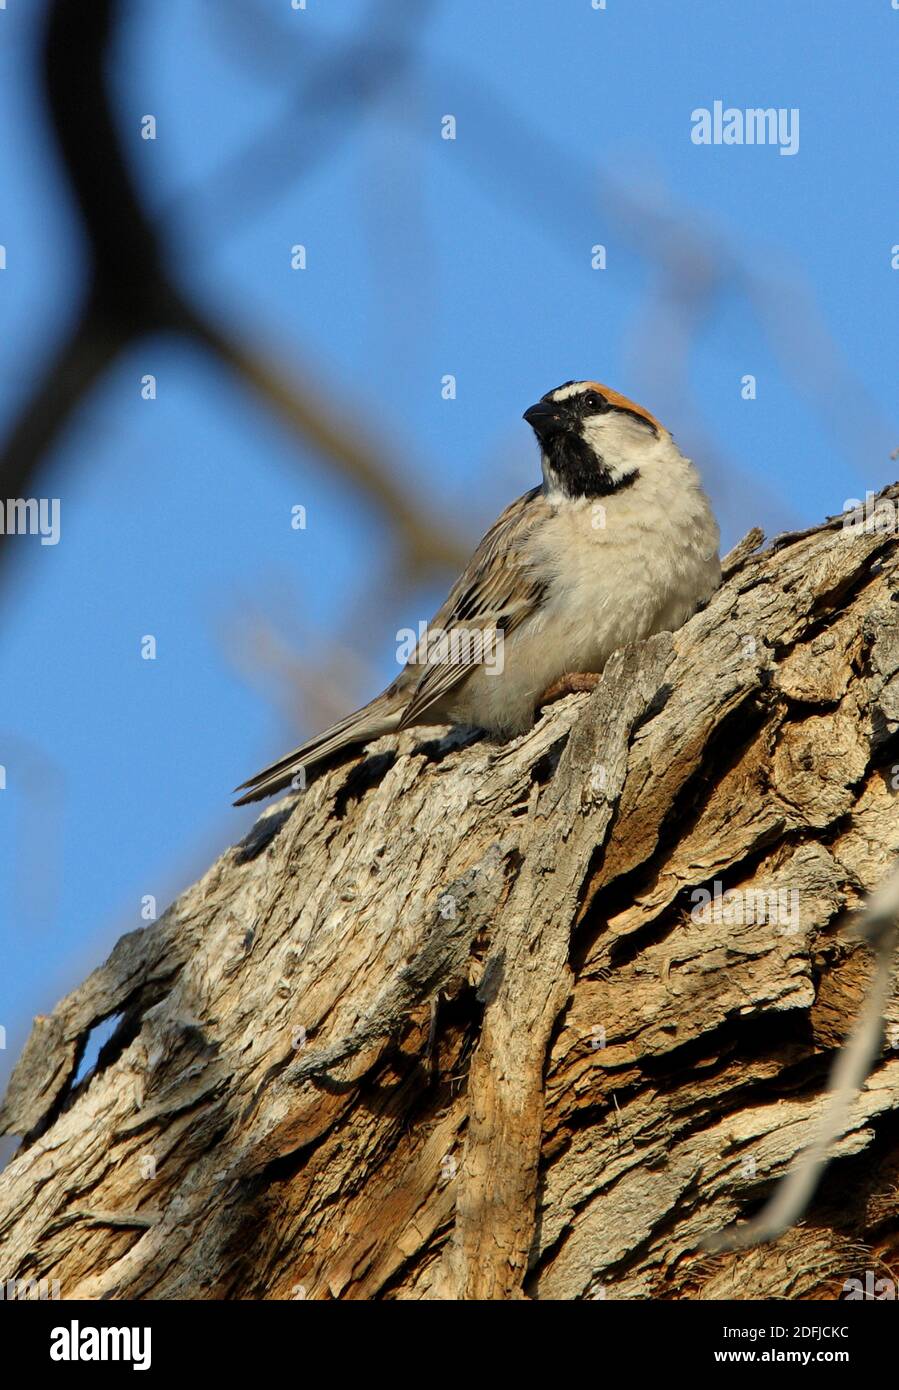 Saxaul Sparrow (Passer ammodendri nigricans) adult perched on tree trunk  Almaty province, Kazakhstan         June Stock Photo